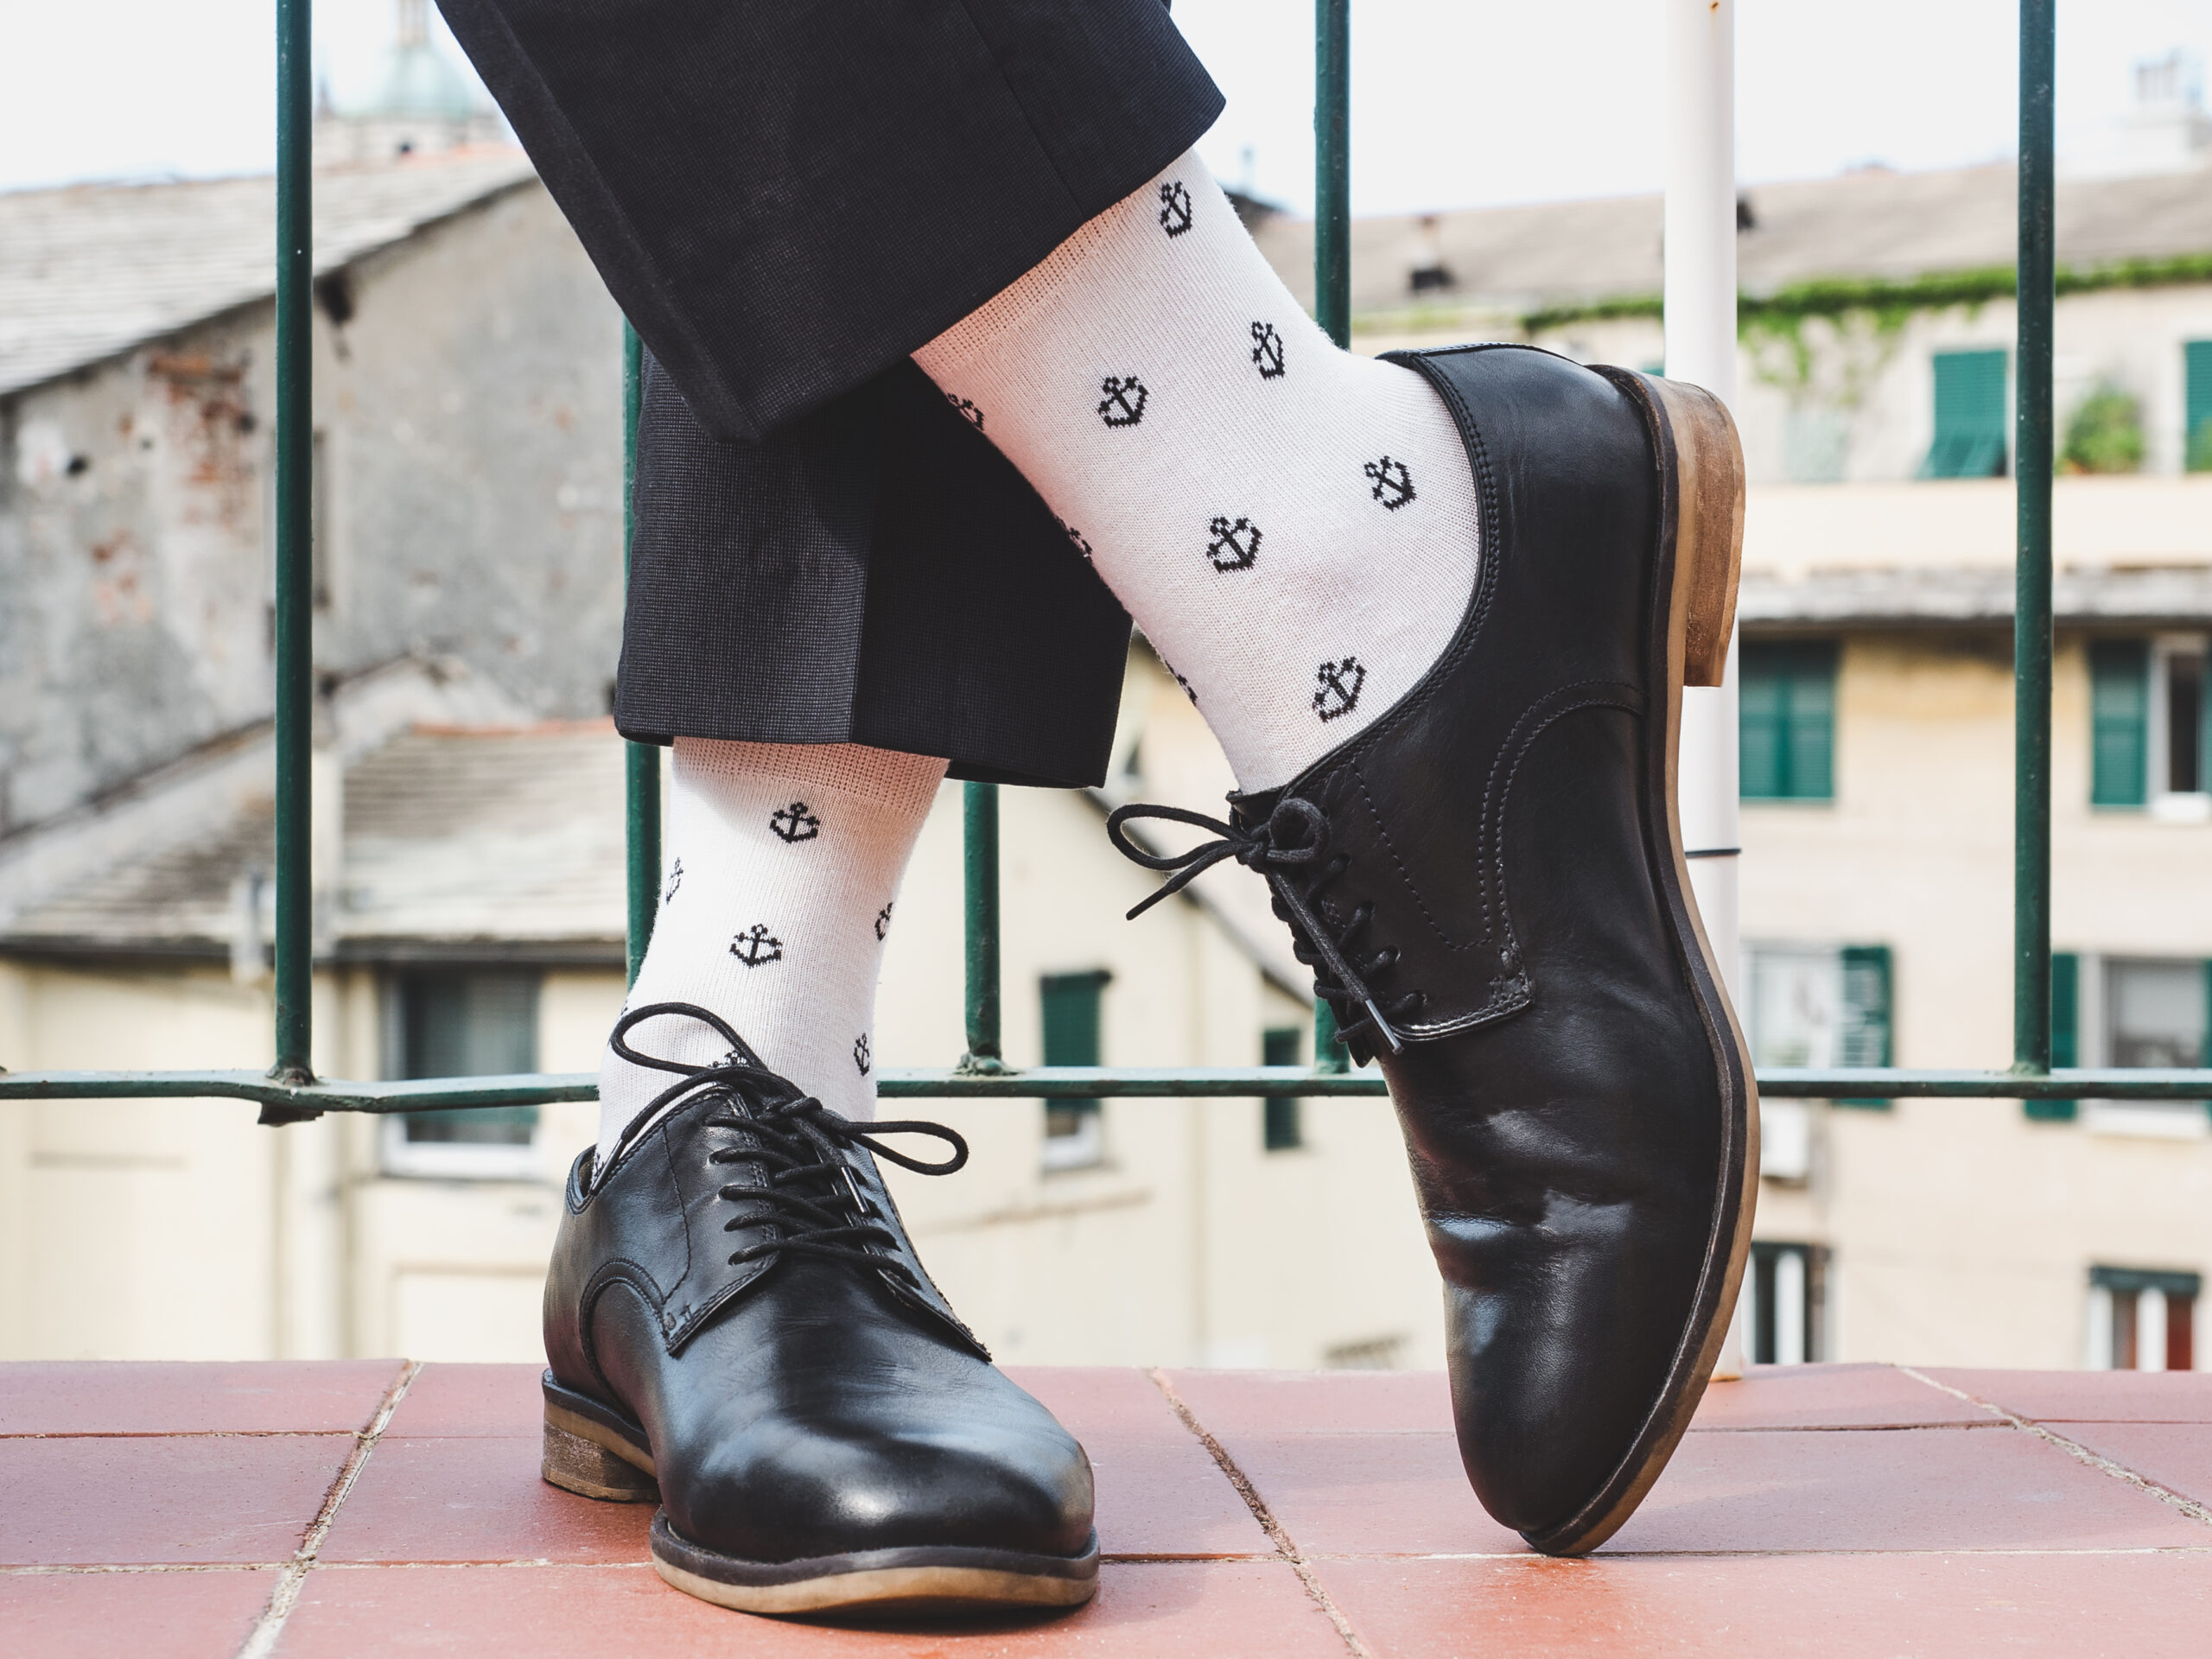 Men's legs, stylish shoes, colorful socks with a pattern in the form of anchors on the background of the street and houses. Concept of style, fashion and beauty